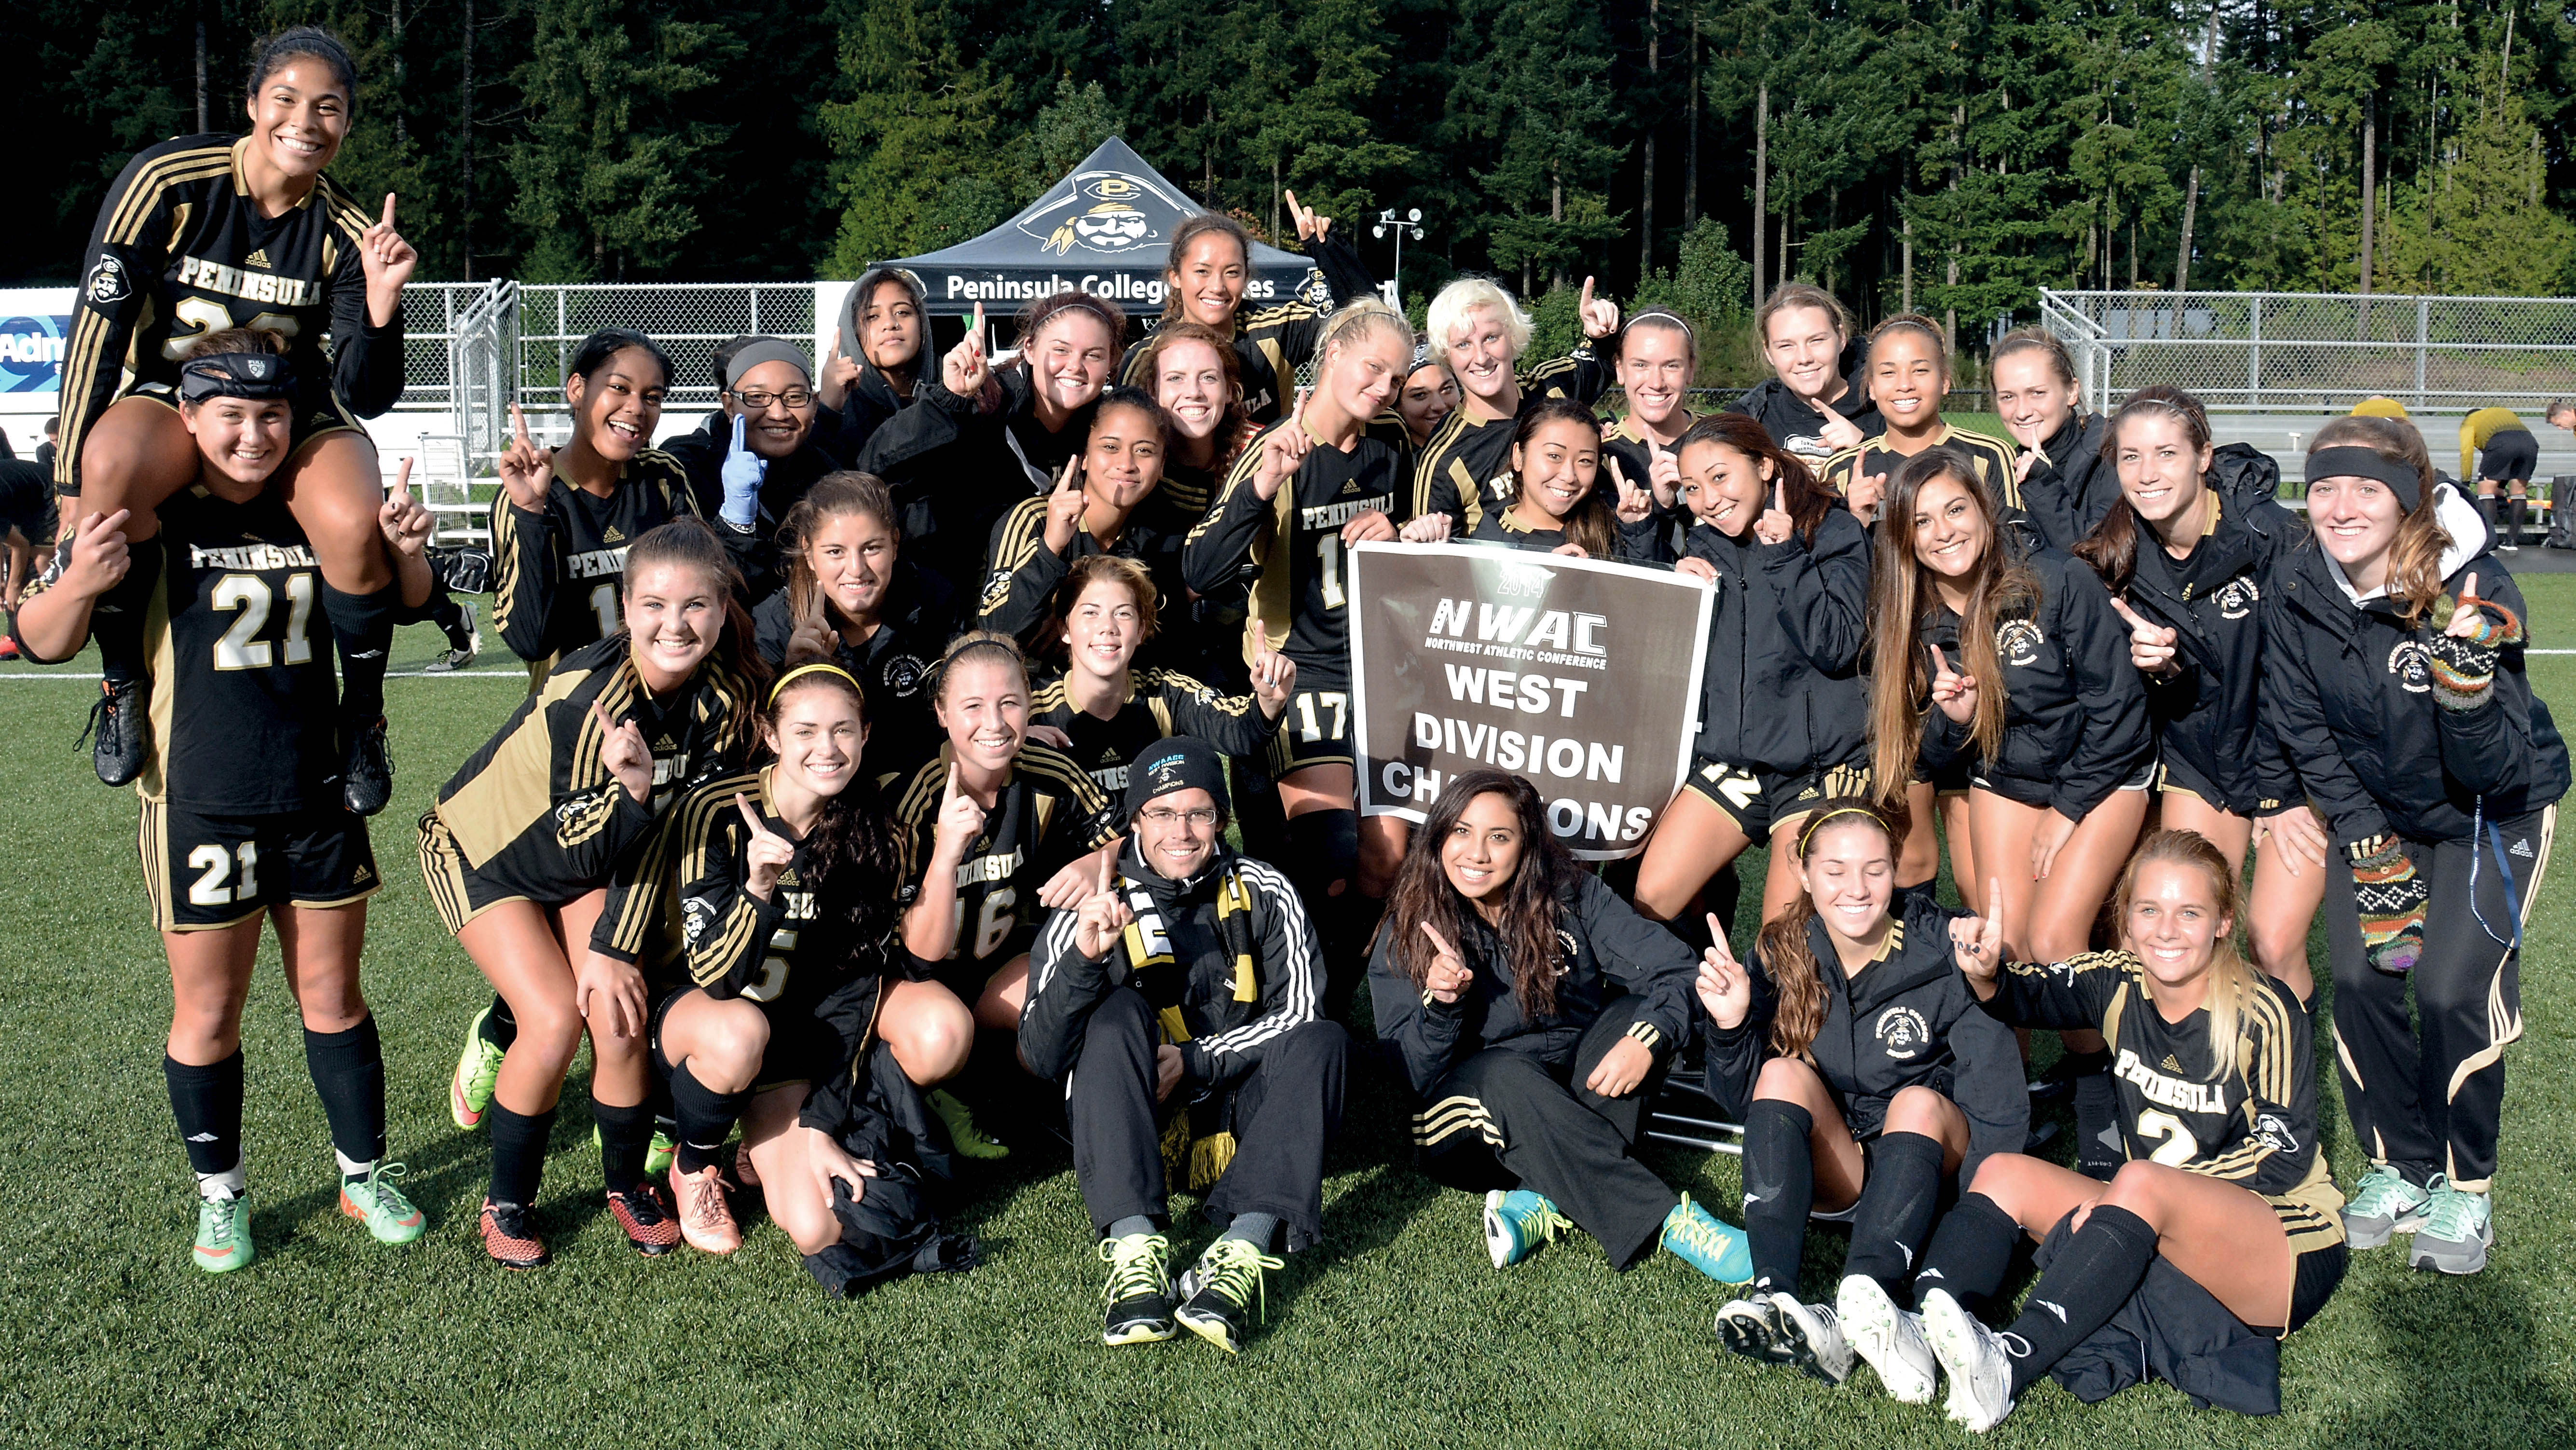 The Peninsula College women's soccer team claimed its fourth division title in the program's fifth year of existence.